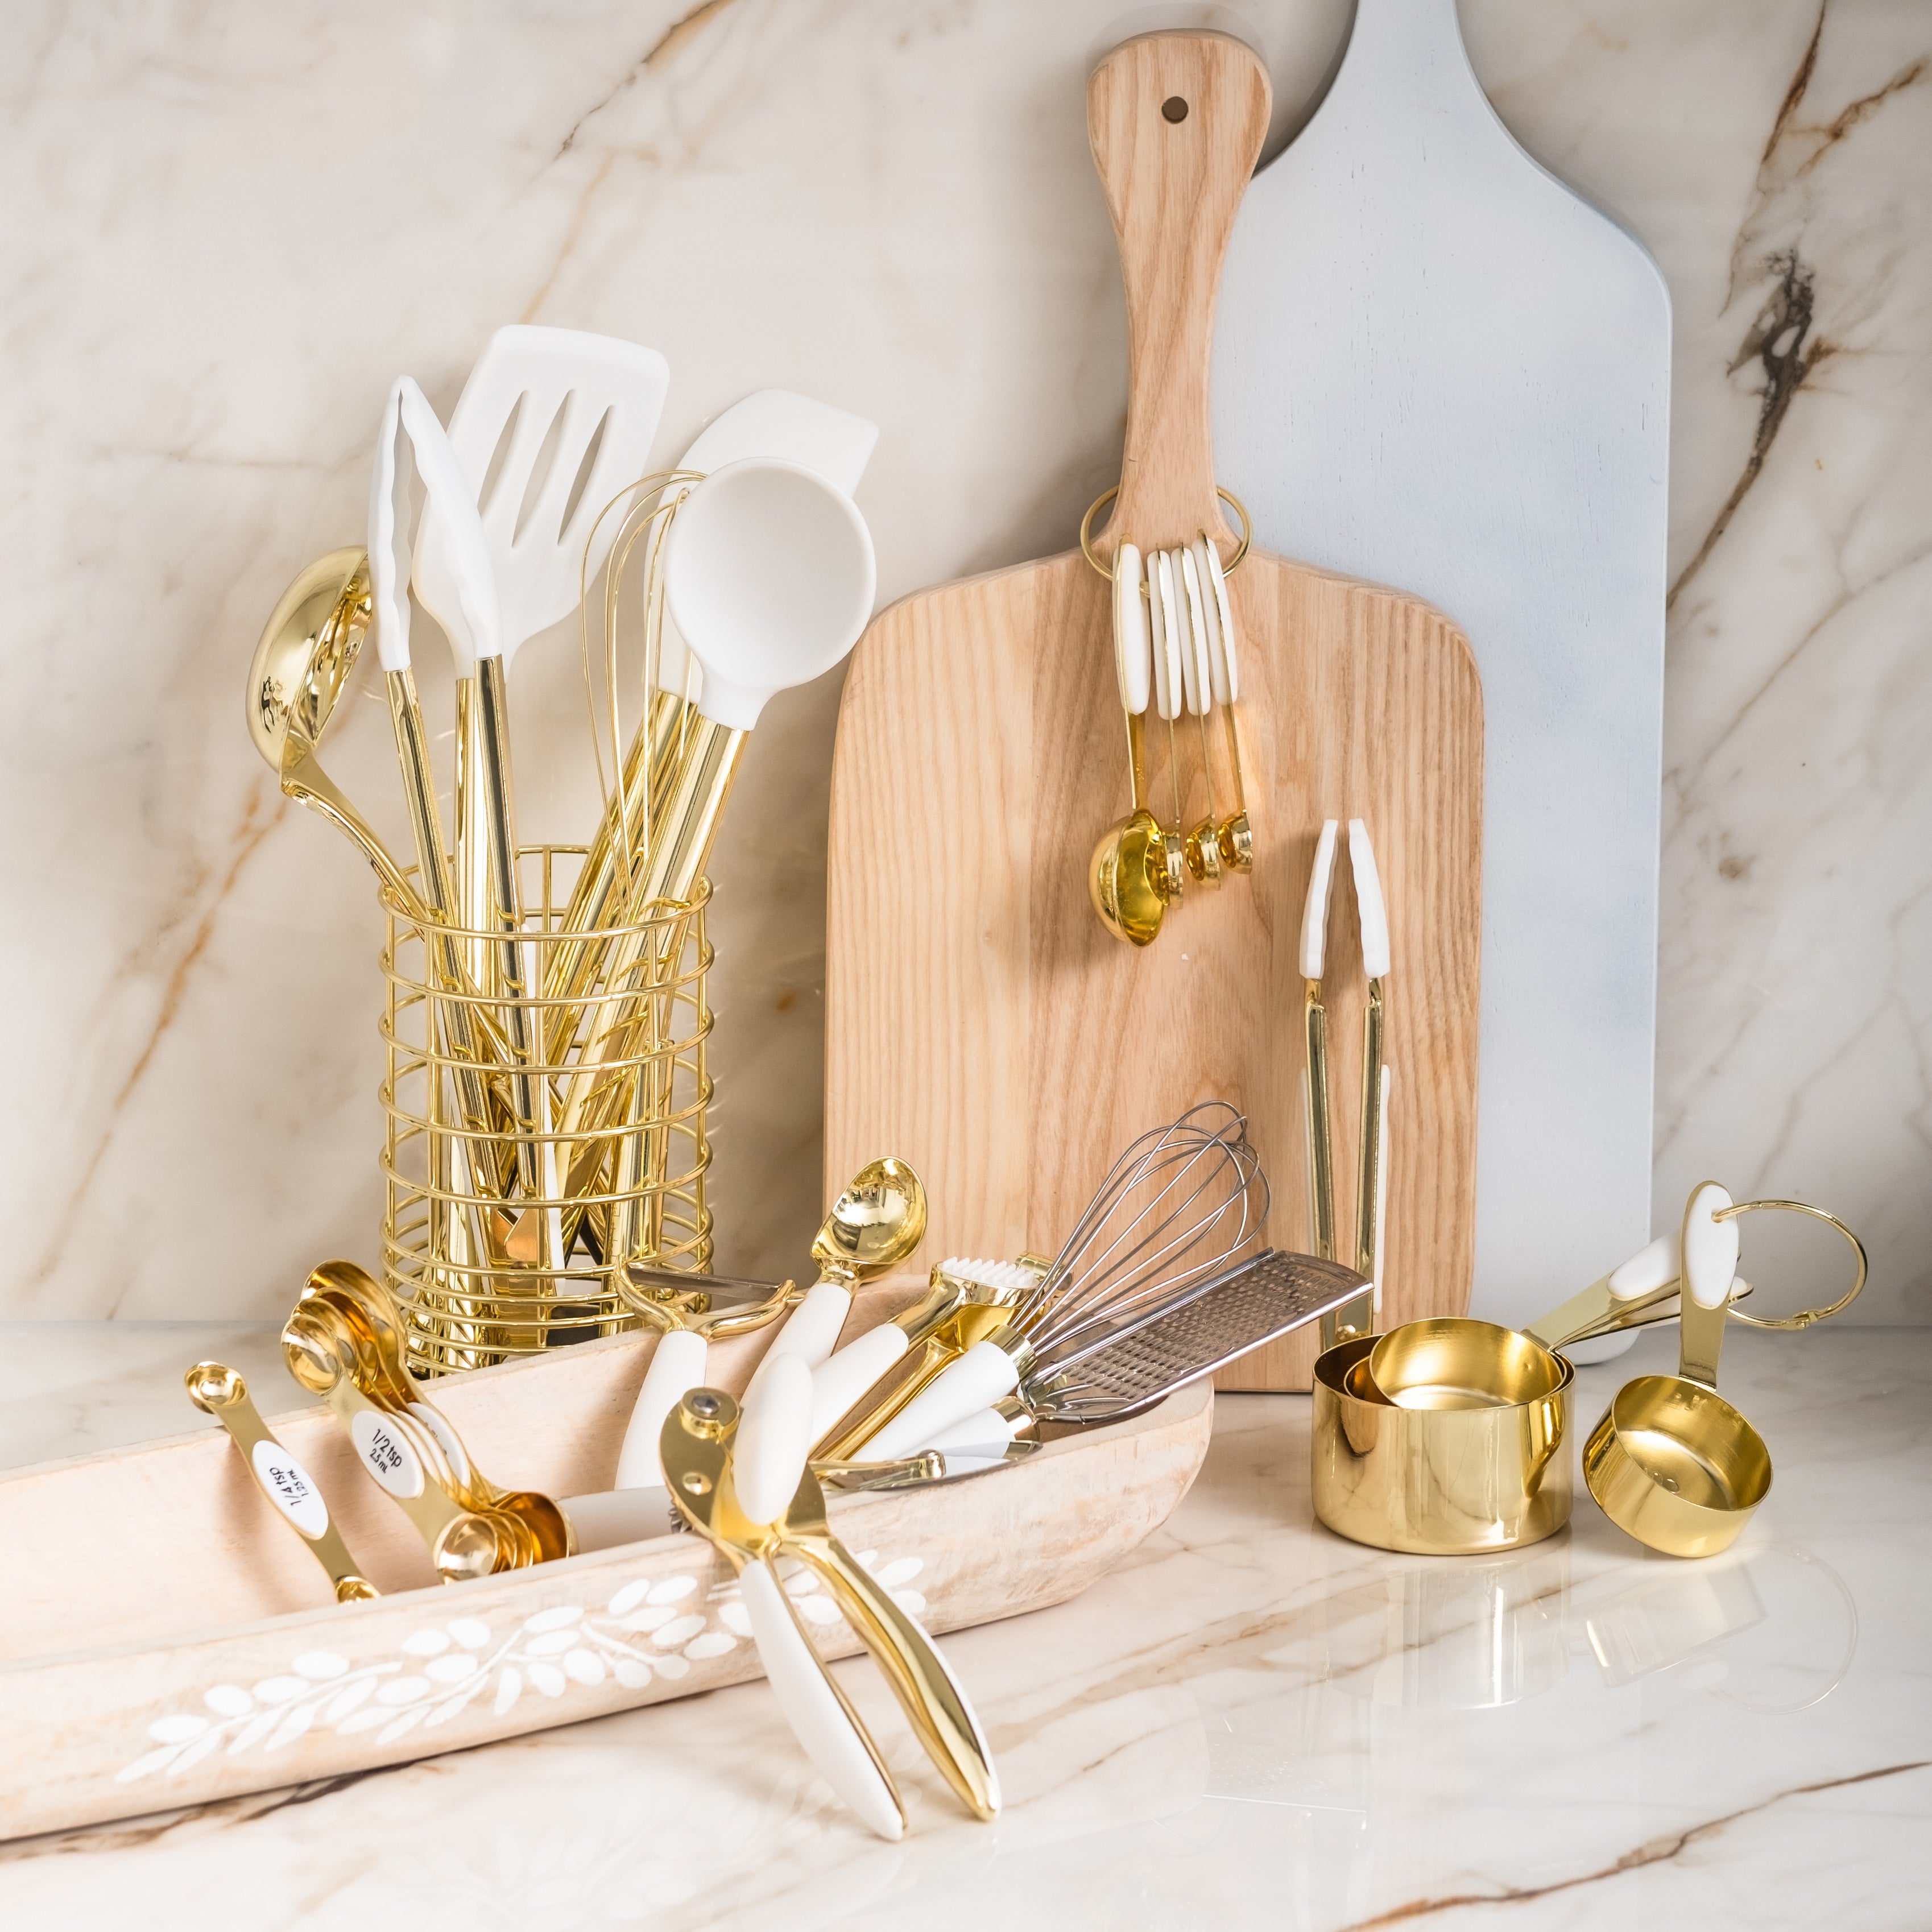 Styled Settings STYLED SETTINGS White and Gold Cooking Utensils with  Stainless Steel Gold Utensil Holder - 16-Piece Set Includes White and